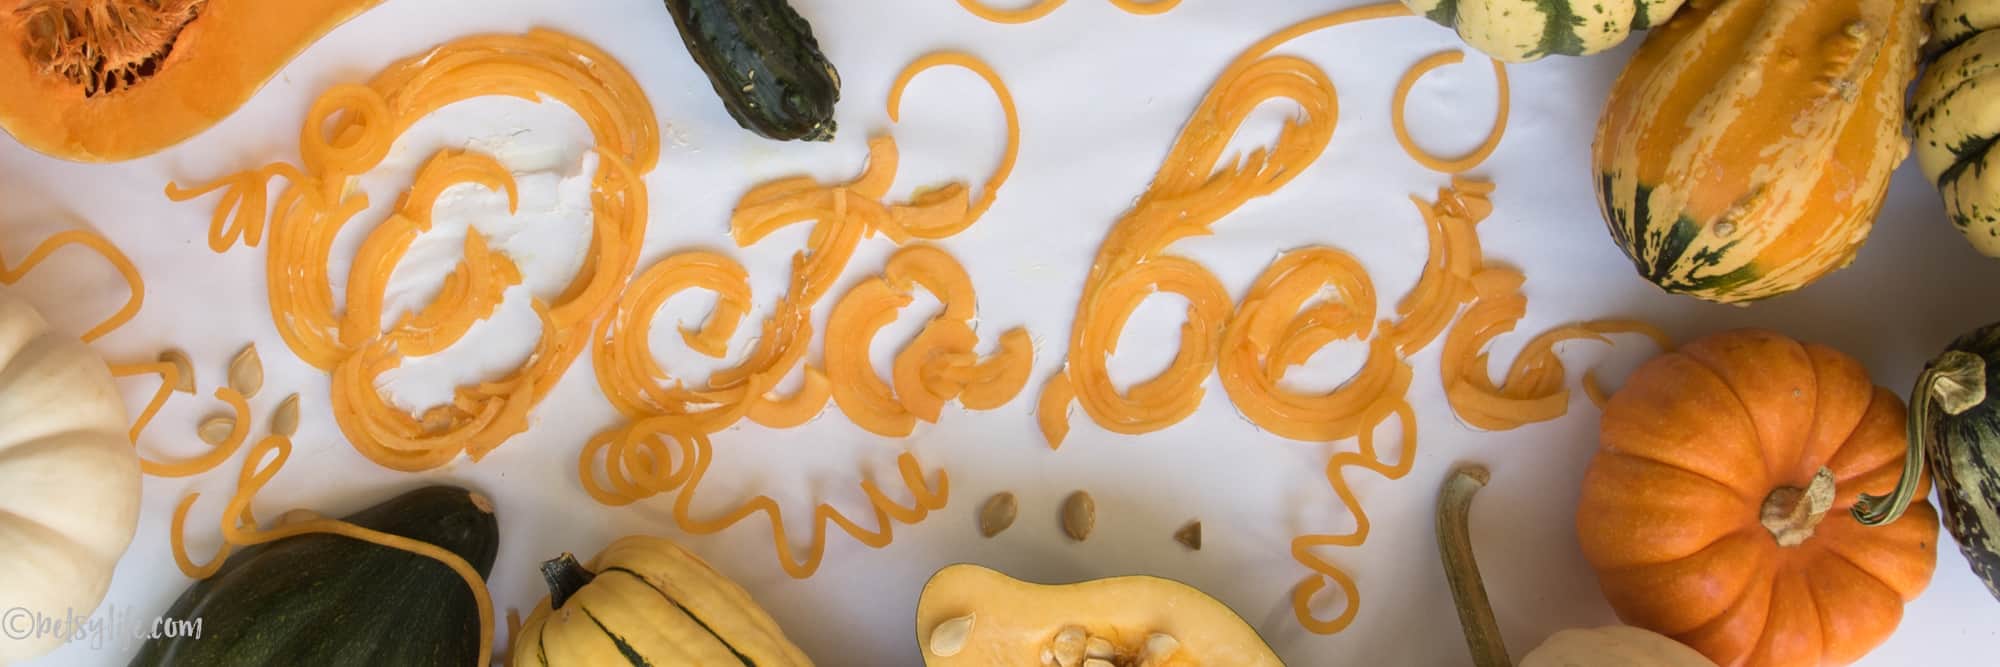 detail of food letters spelling out October with squash and seeds